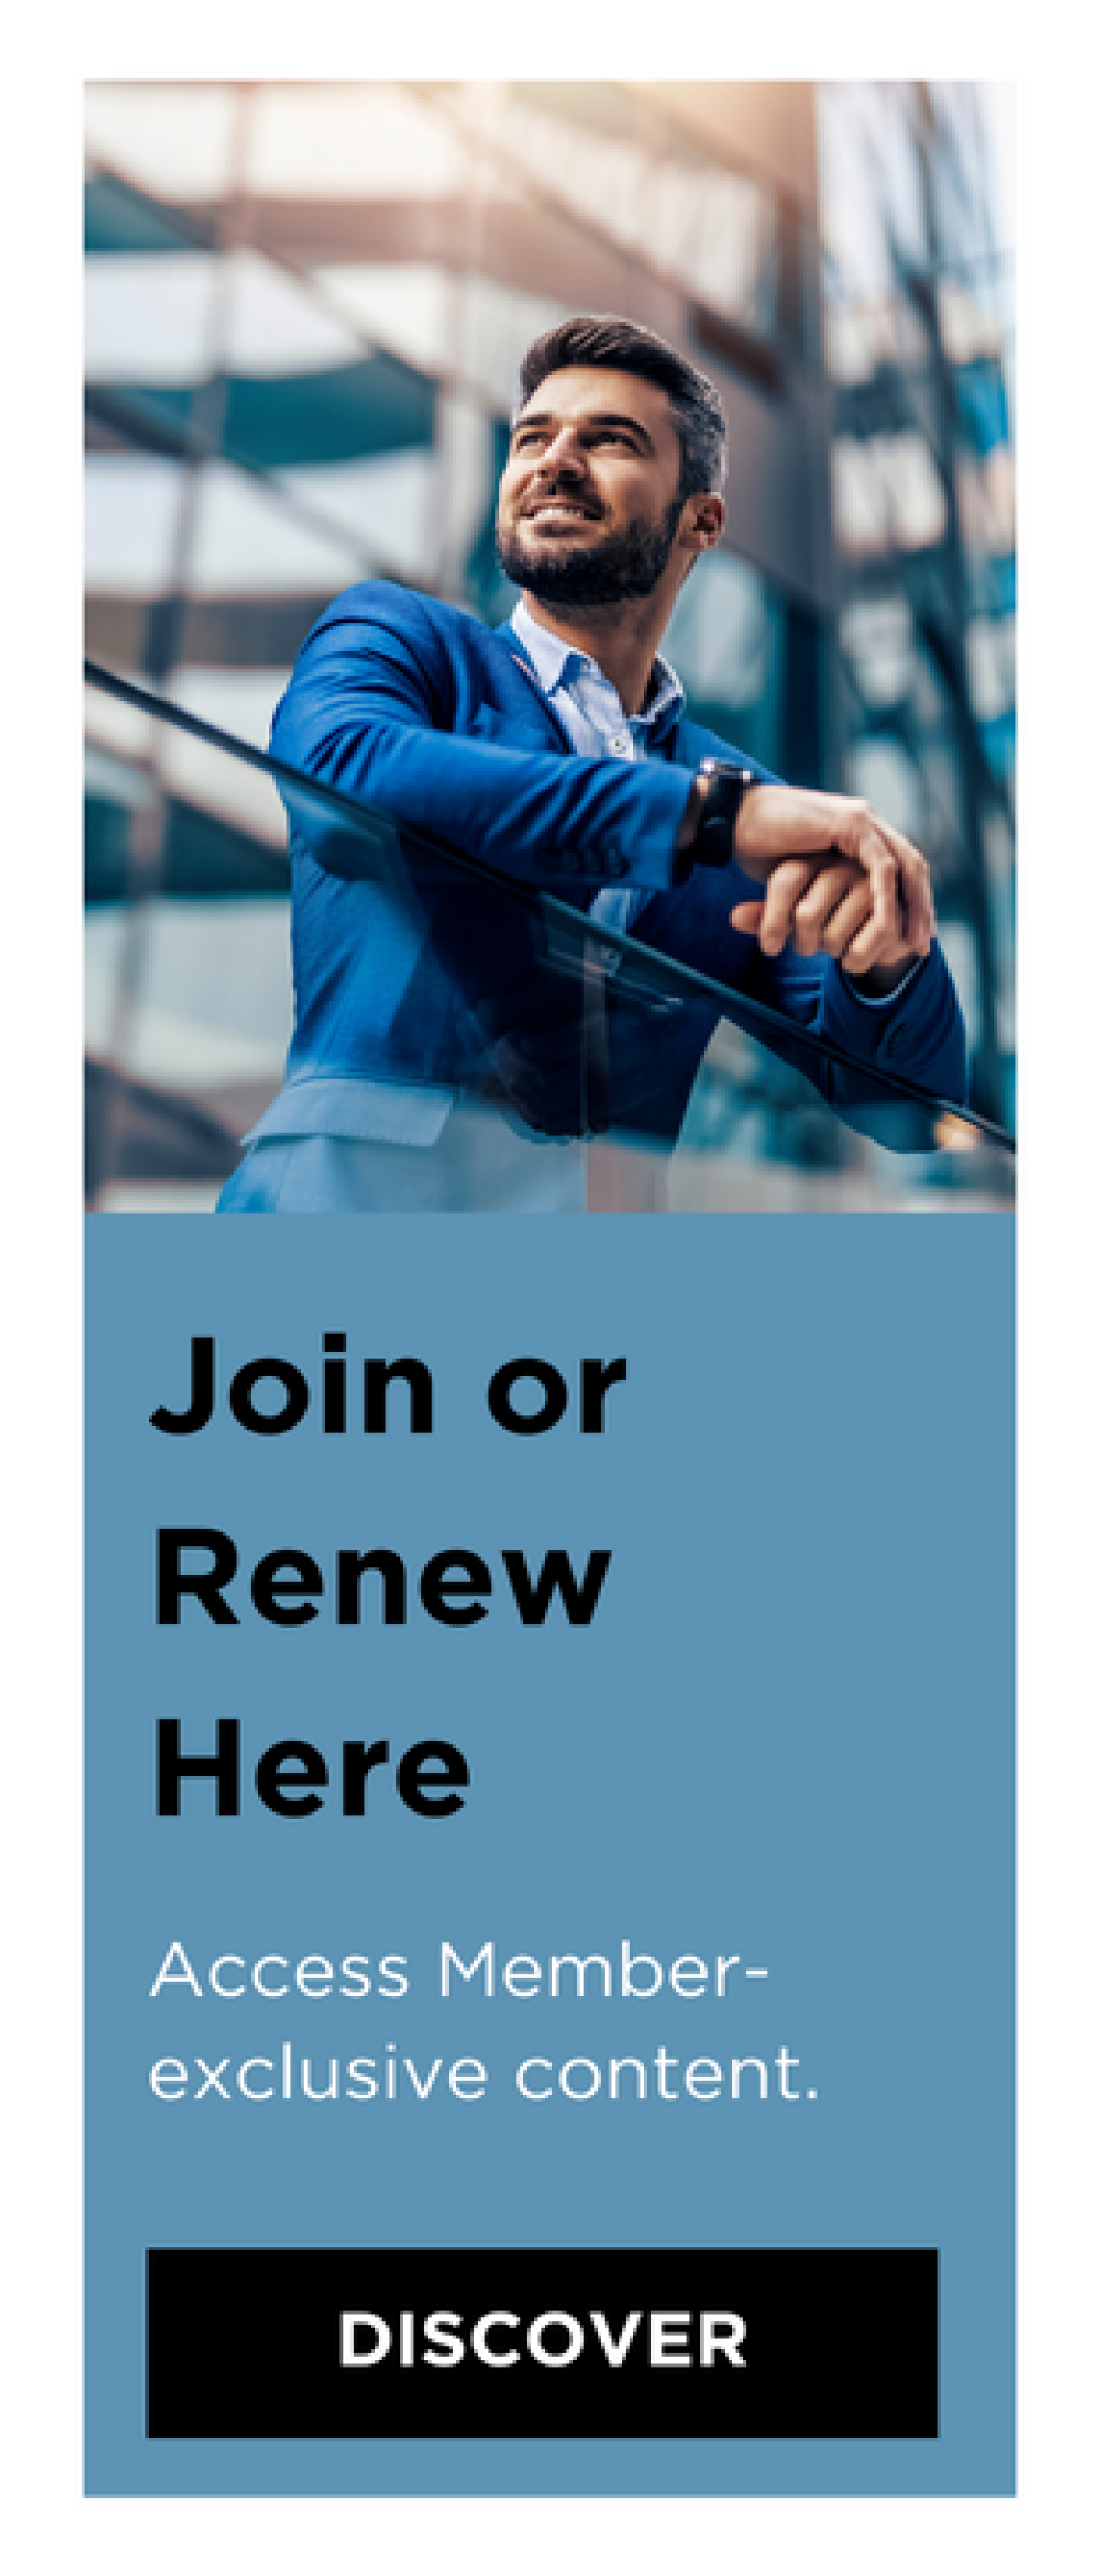 Join or Renew here